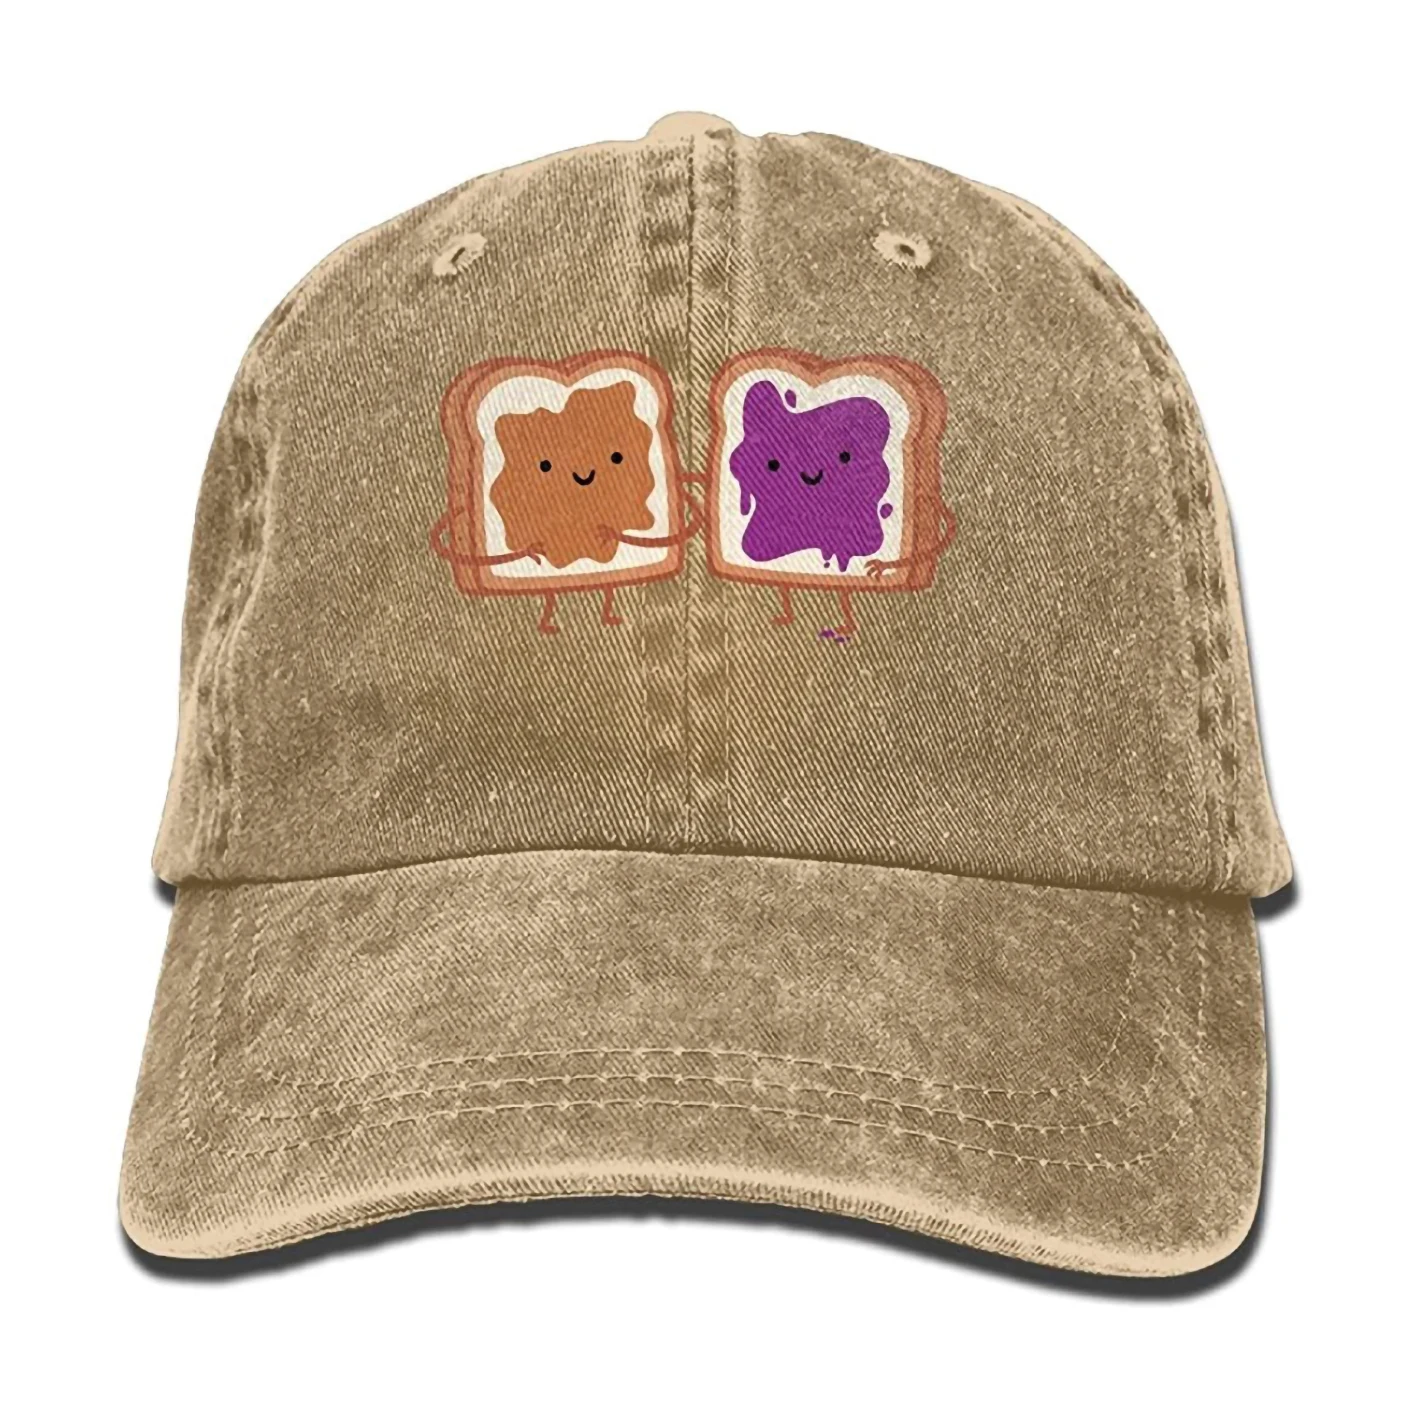 

Baseball Jeans Cap Peanut Butter And Jelly Men Snapback Caps Style Low Profile